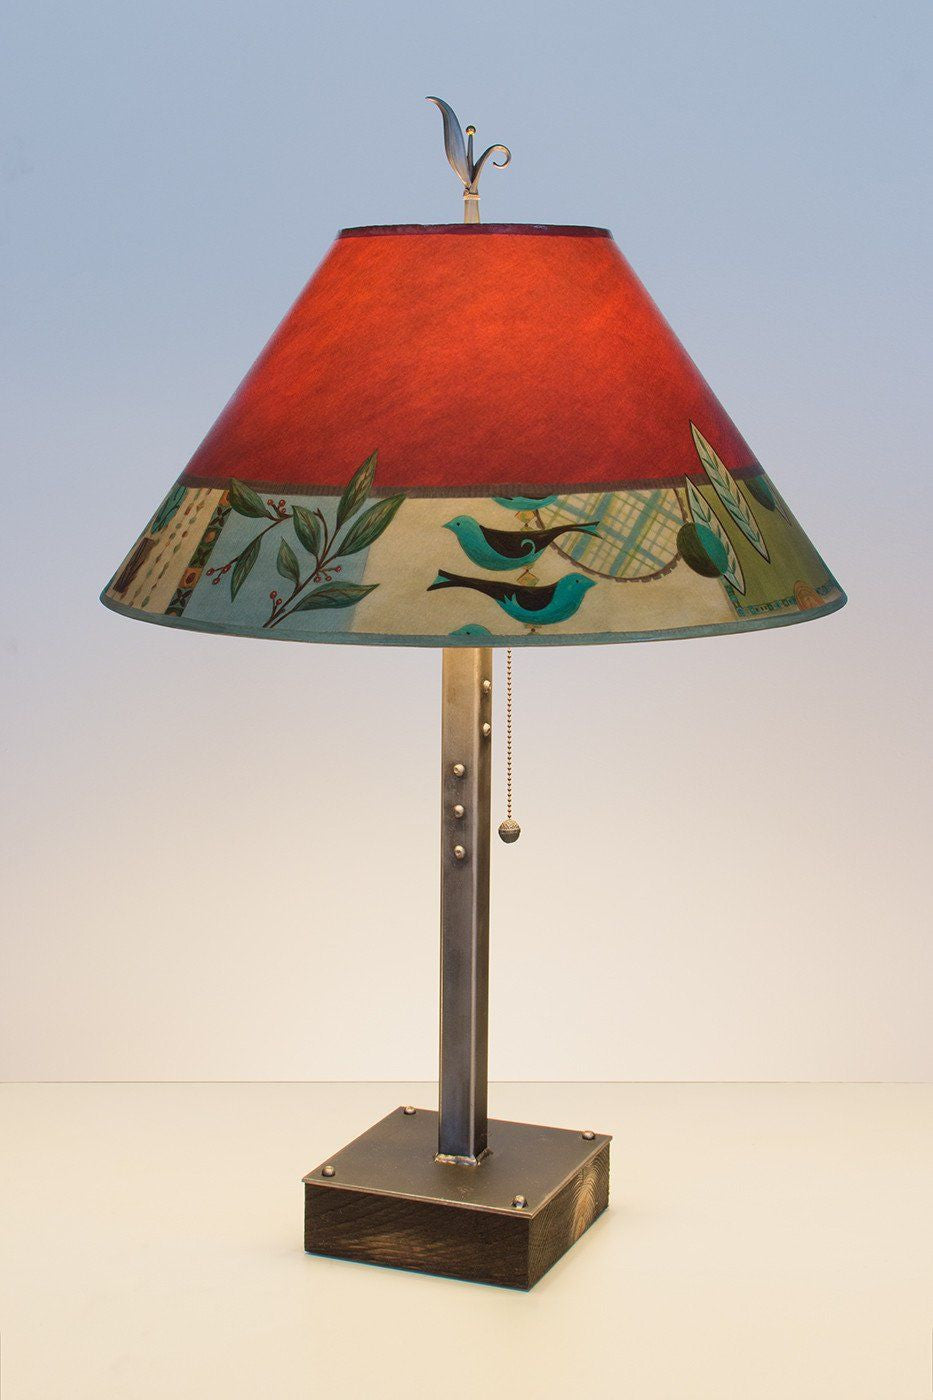 Janna Ugone &amp; Co Table Lamps Steel Table Lamp on Wood with Large Conical Shade in New Capri